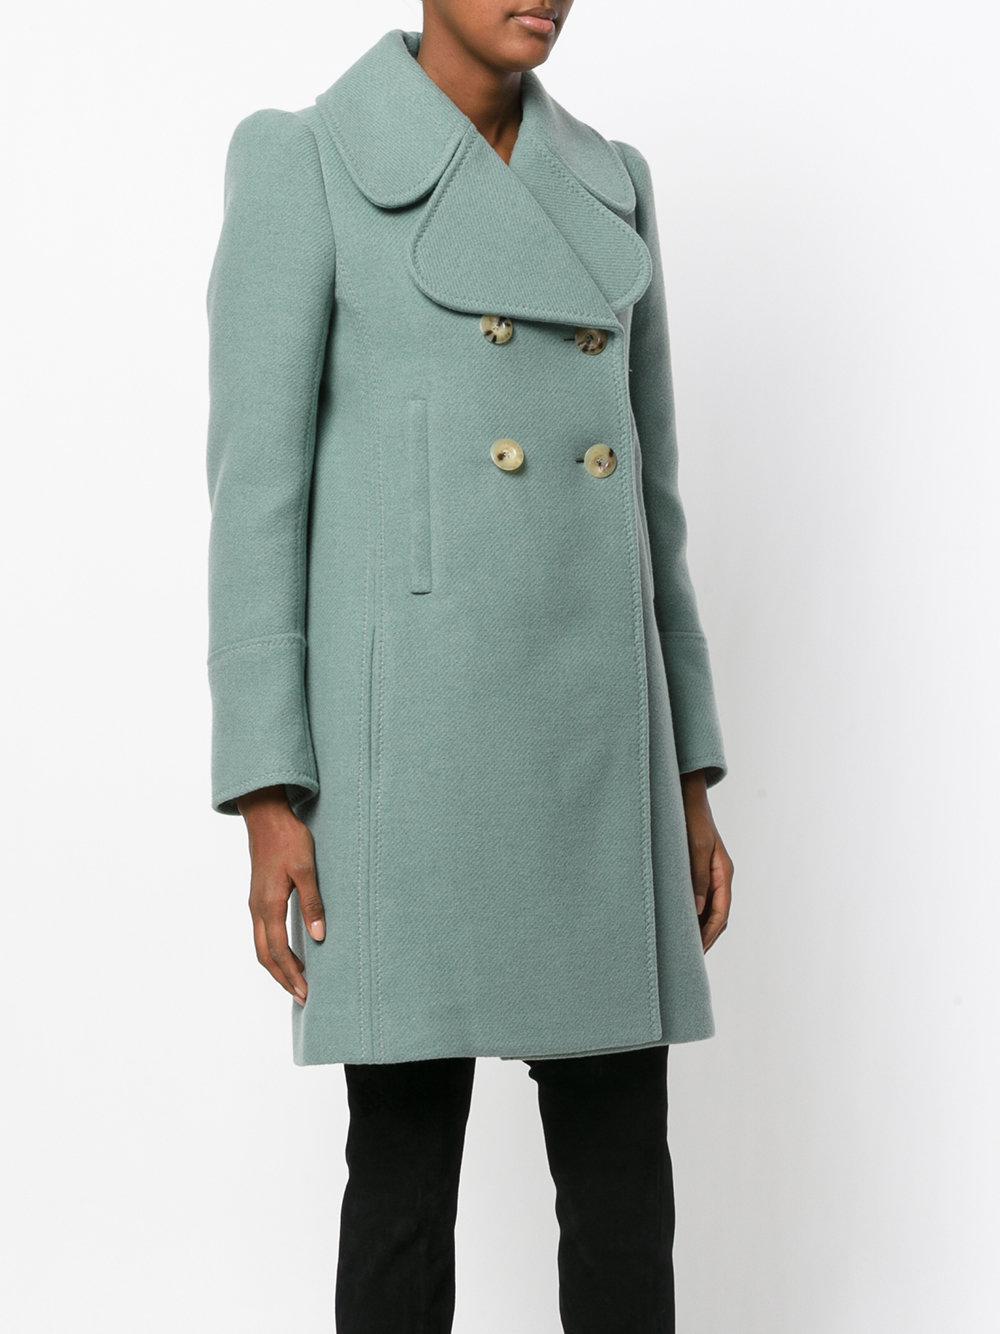 Chloé Wool Oversized Collar Double Breasted Coat in Green - Lyst